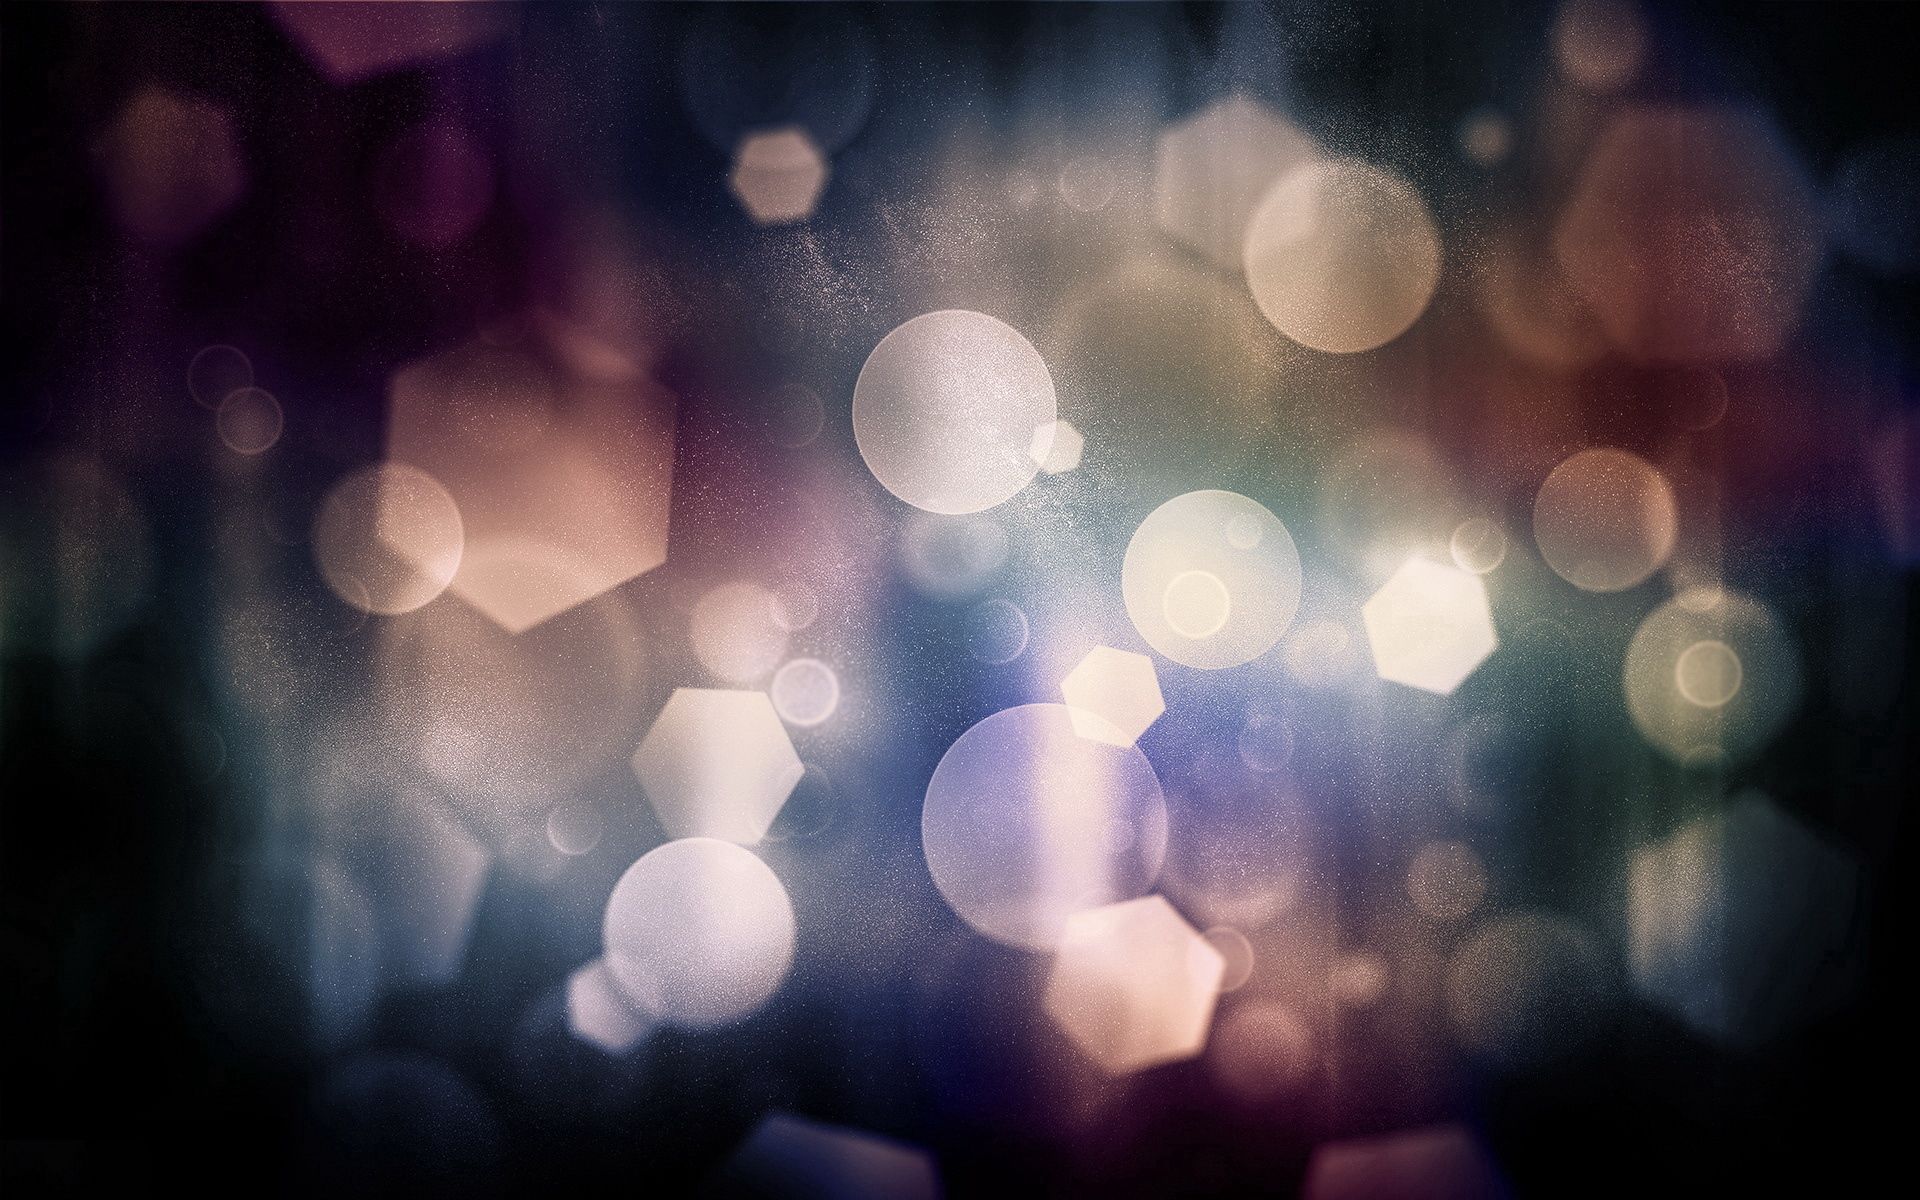 lights, texture, textures, form, flash, color, forms, outbreaks